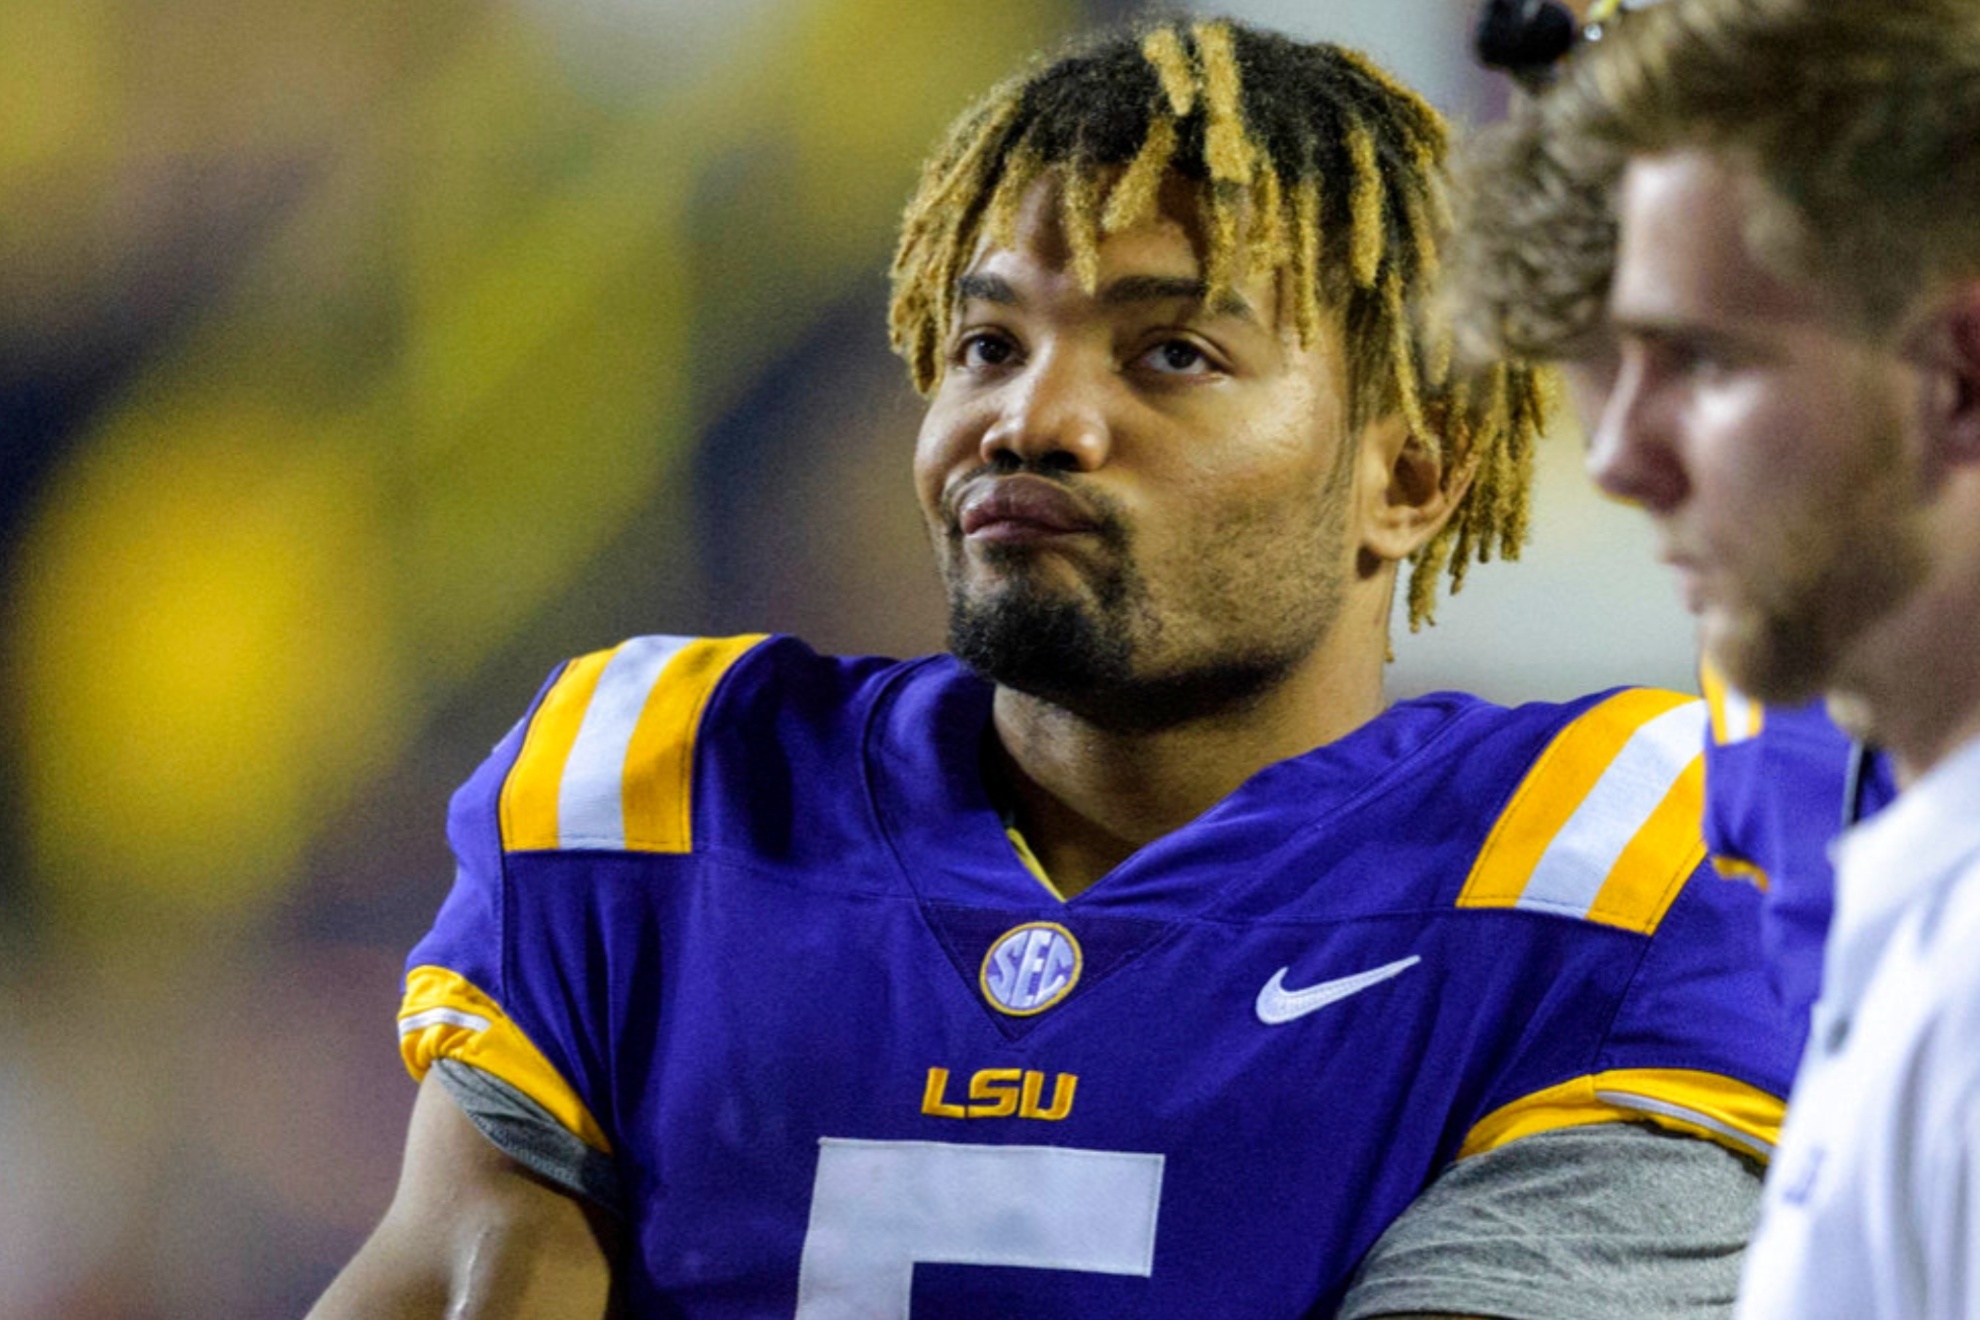 Derrius Guice was accused but never charged of rape during his time with LSU